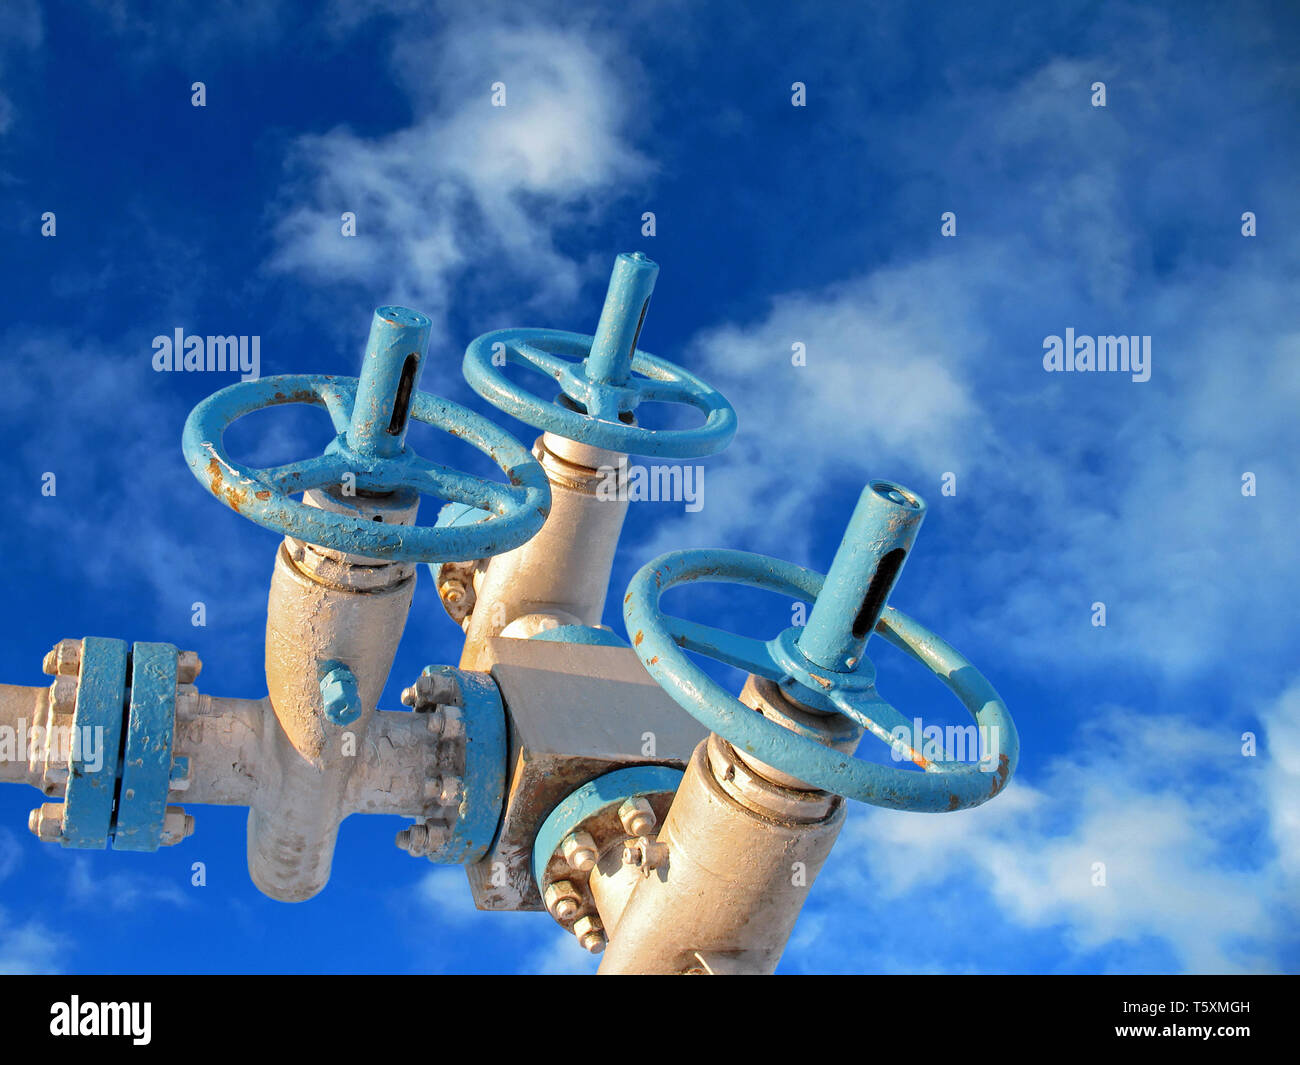 Latch on a oil well. Oil industry. Construction and mechanism in work. Stock Photo